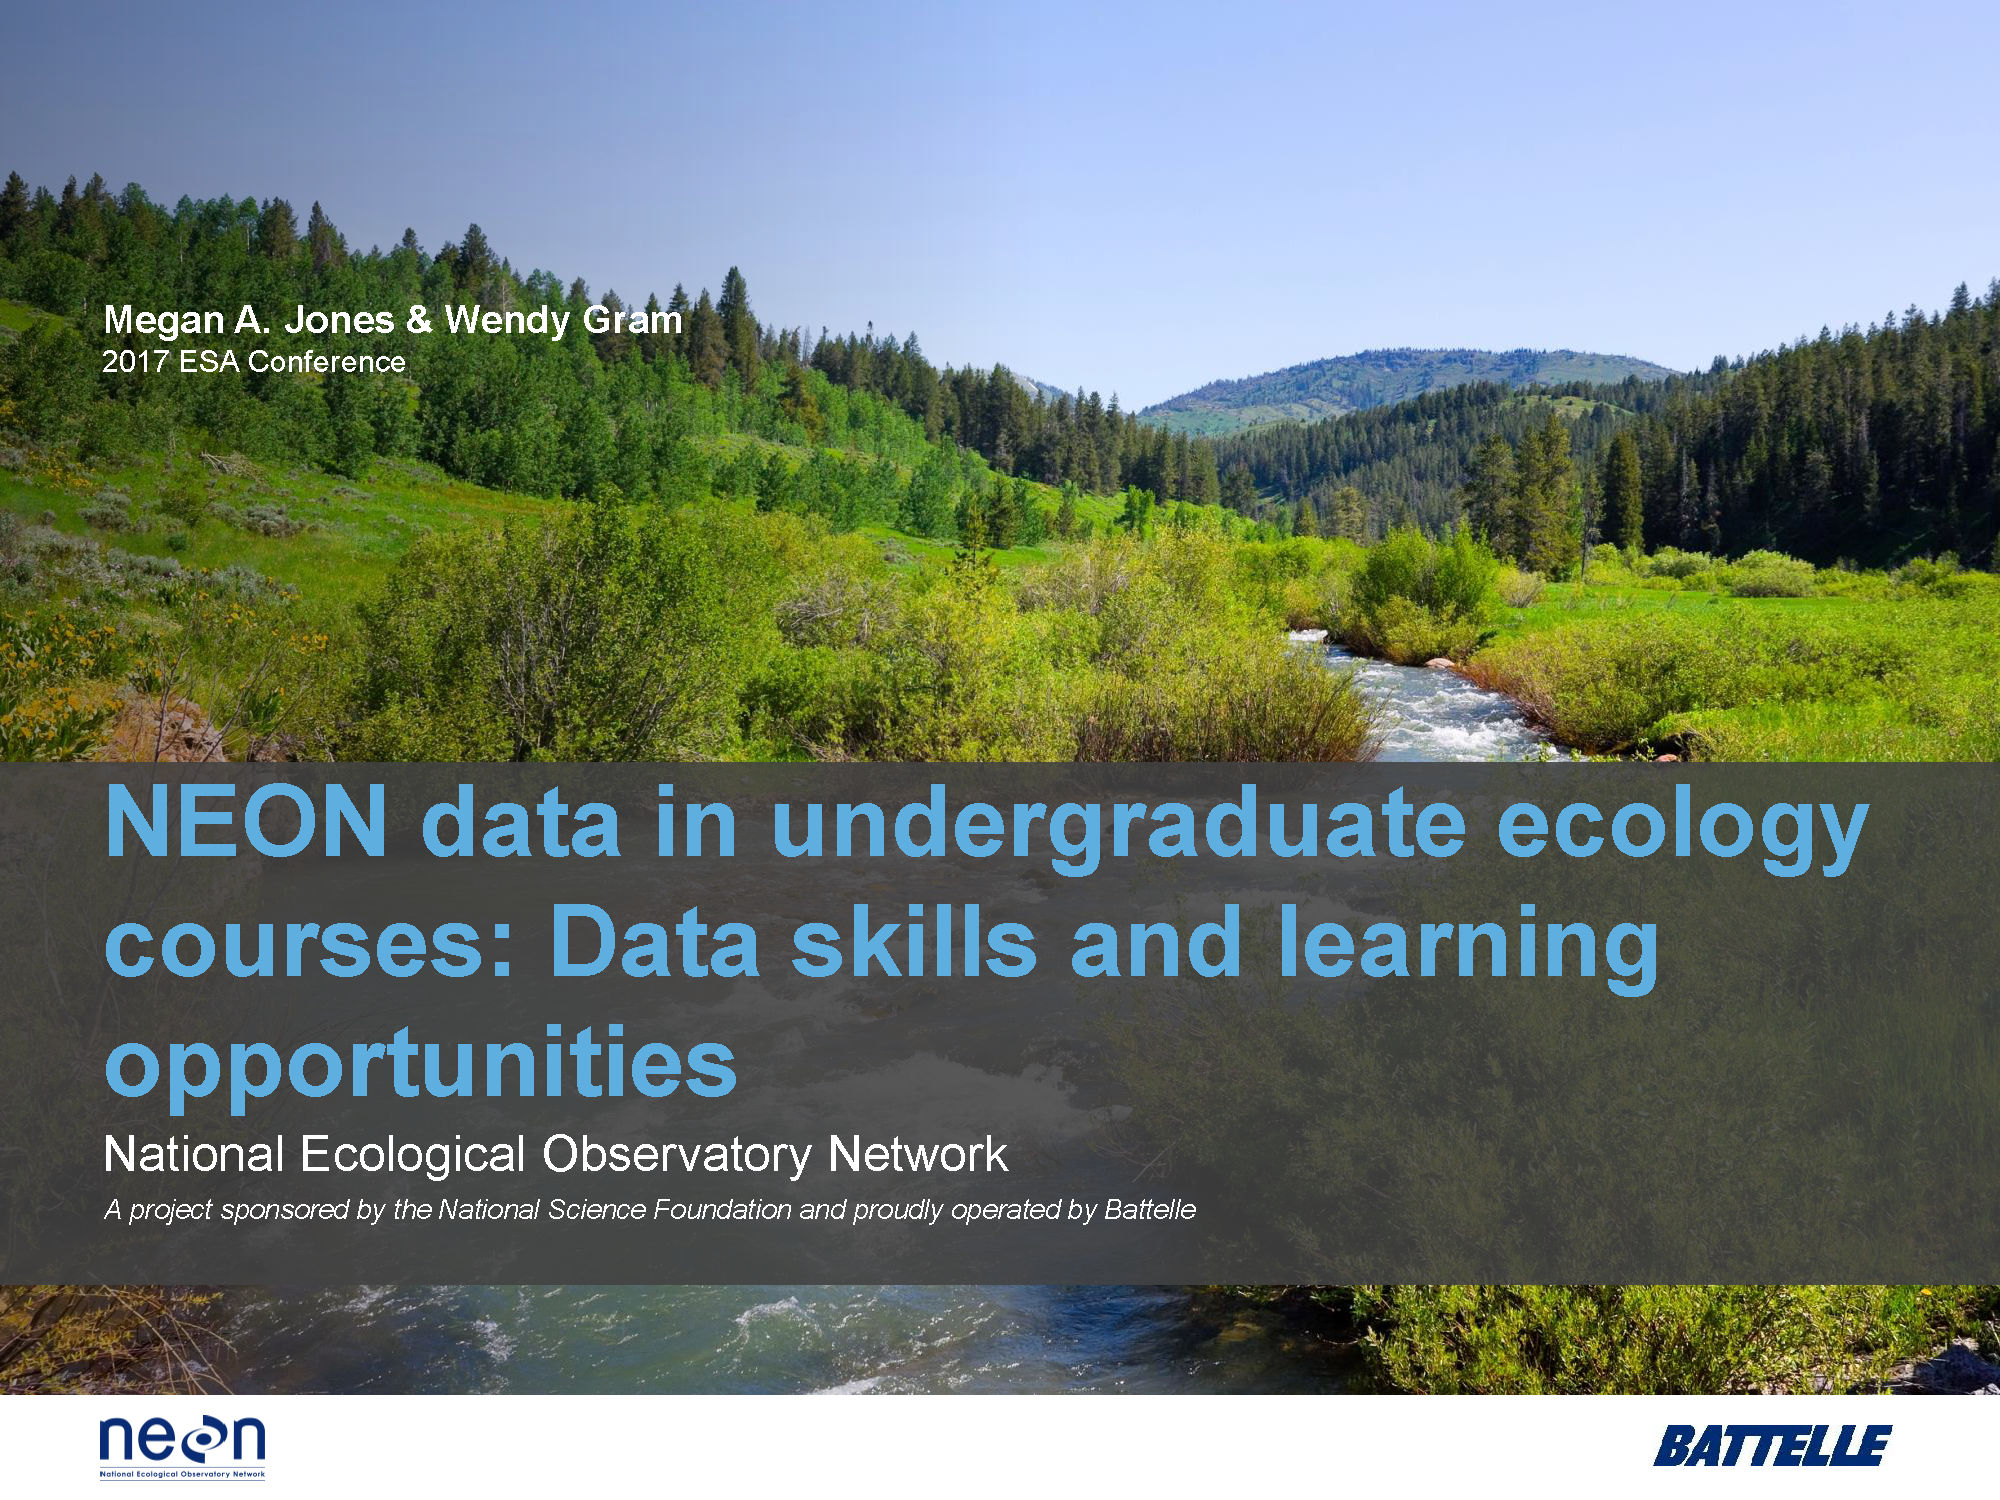 NEON data in undergraduate ecology courses: Data skills and learning opportunities